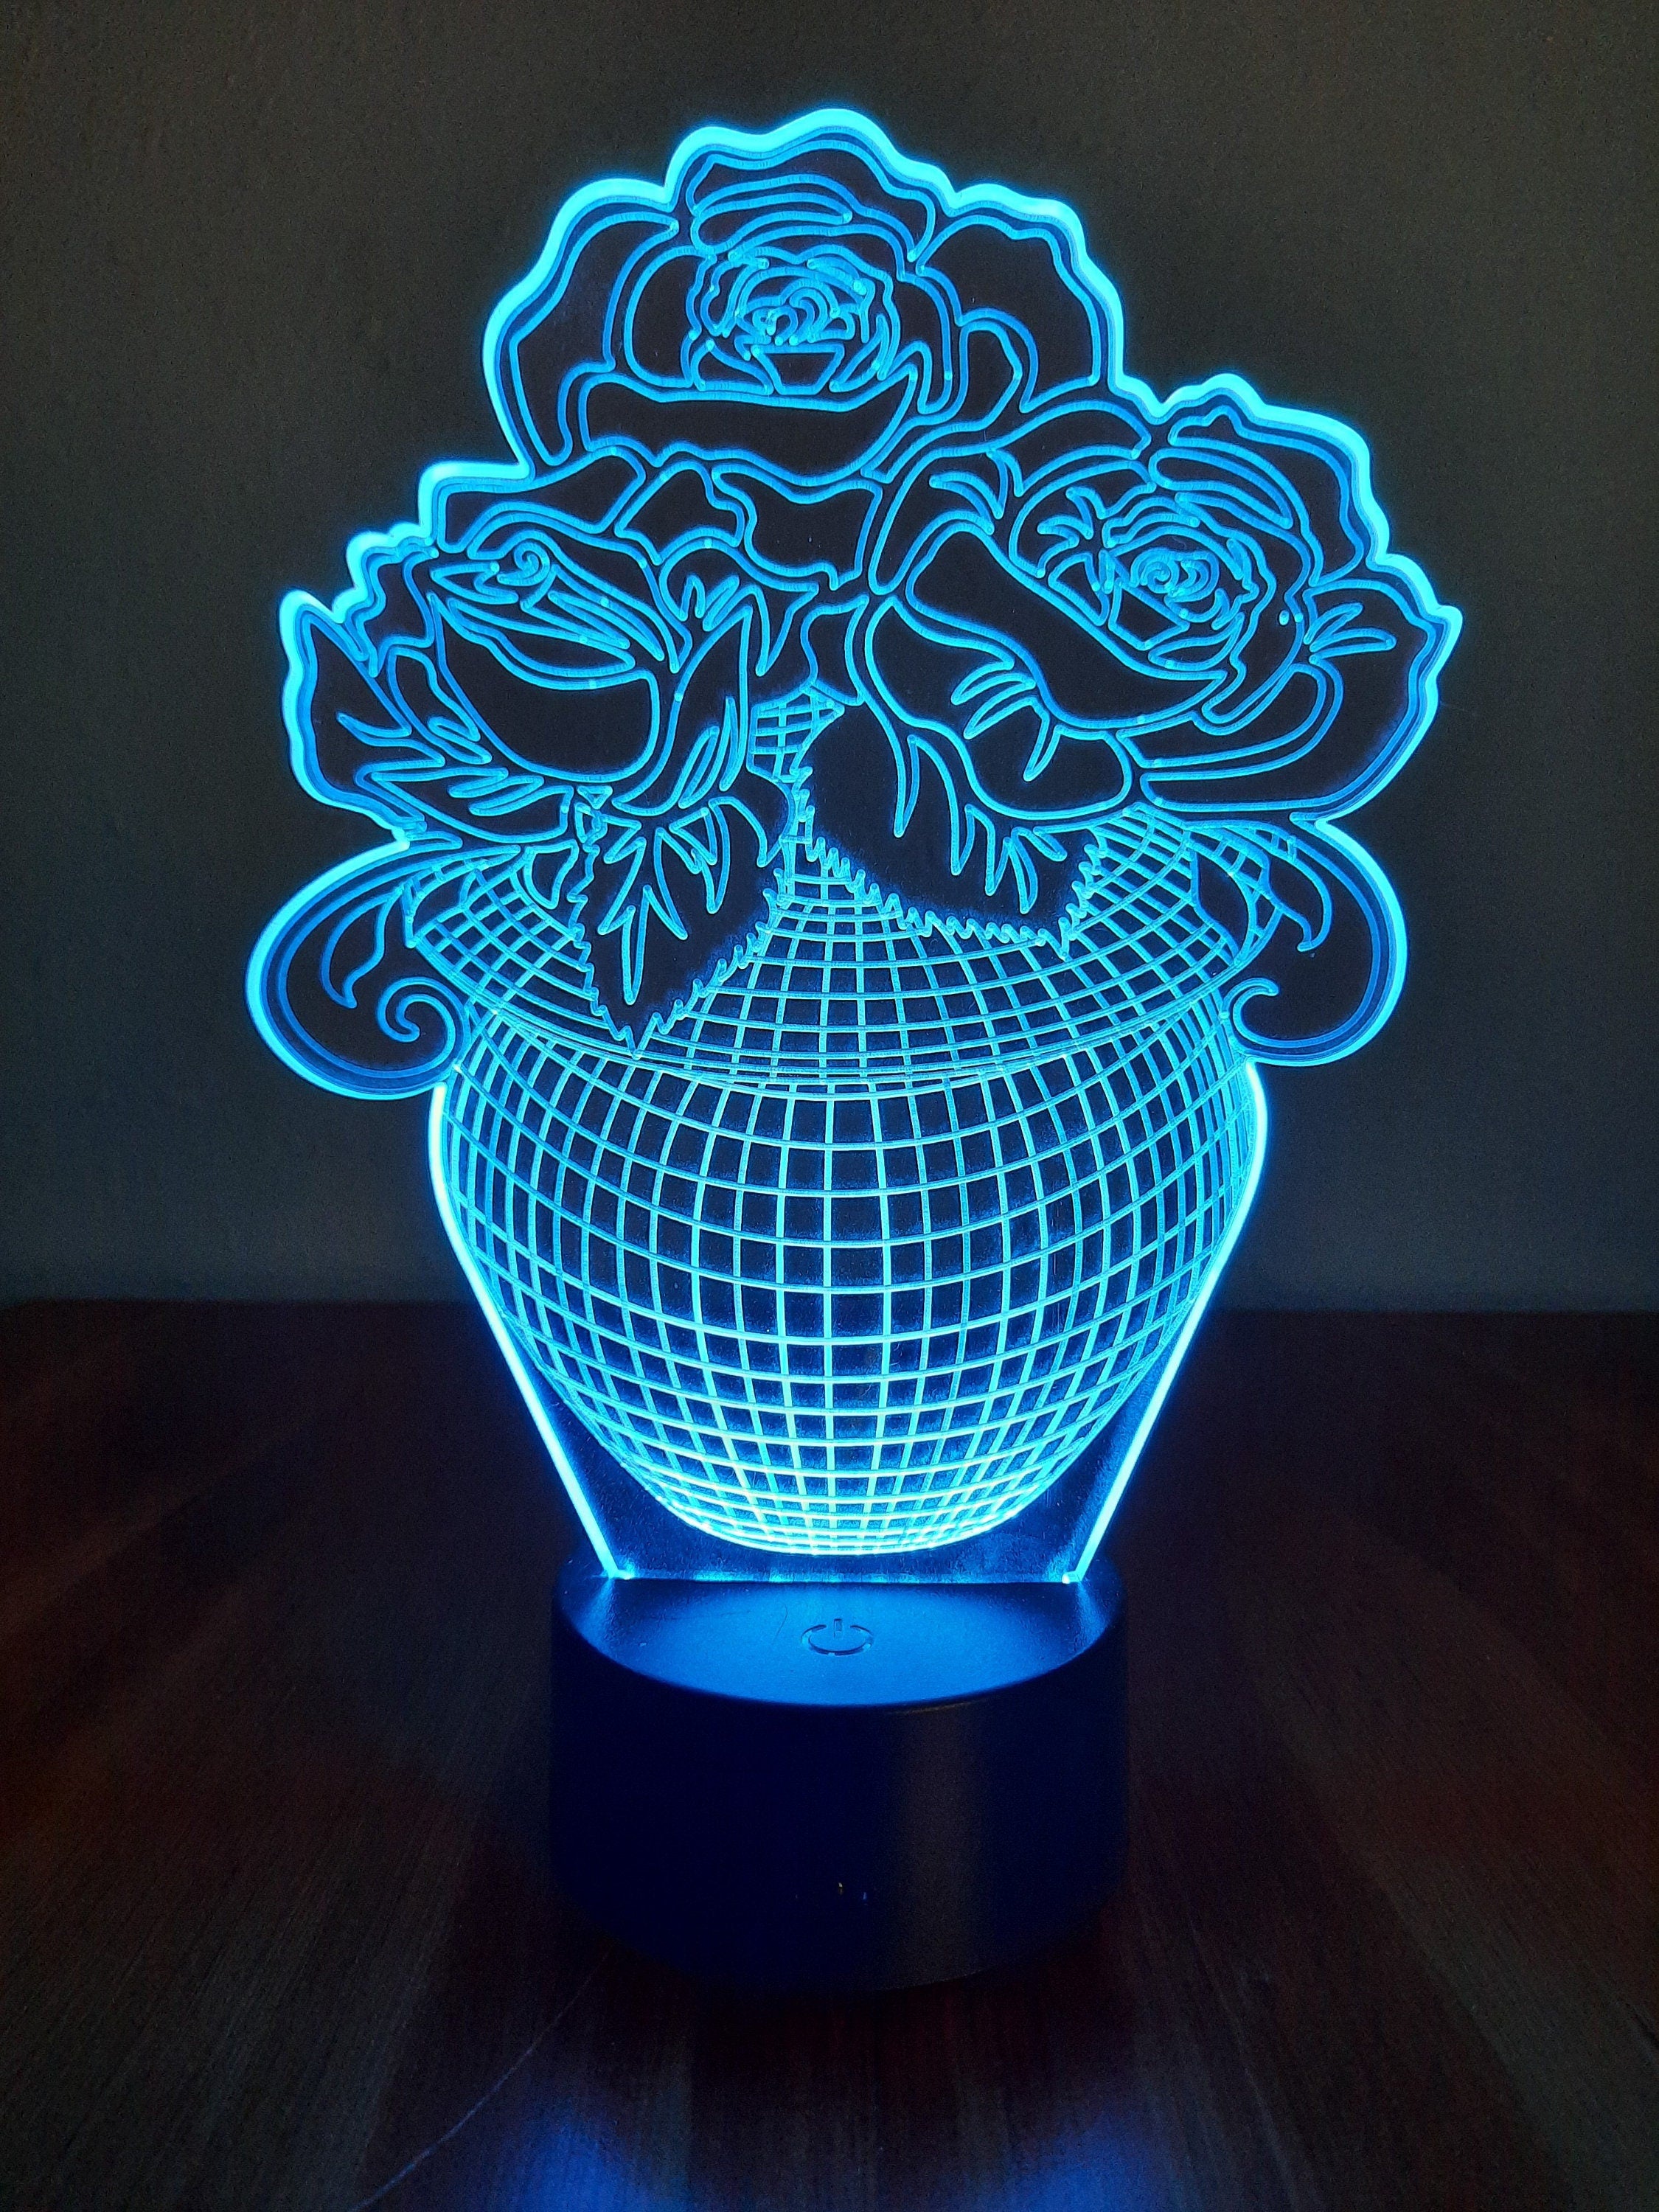 Awesome "Bowl of Roses" 3D LED Lamp (1139) - FREE SHIPPING!